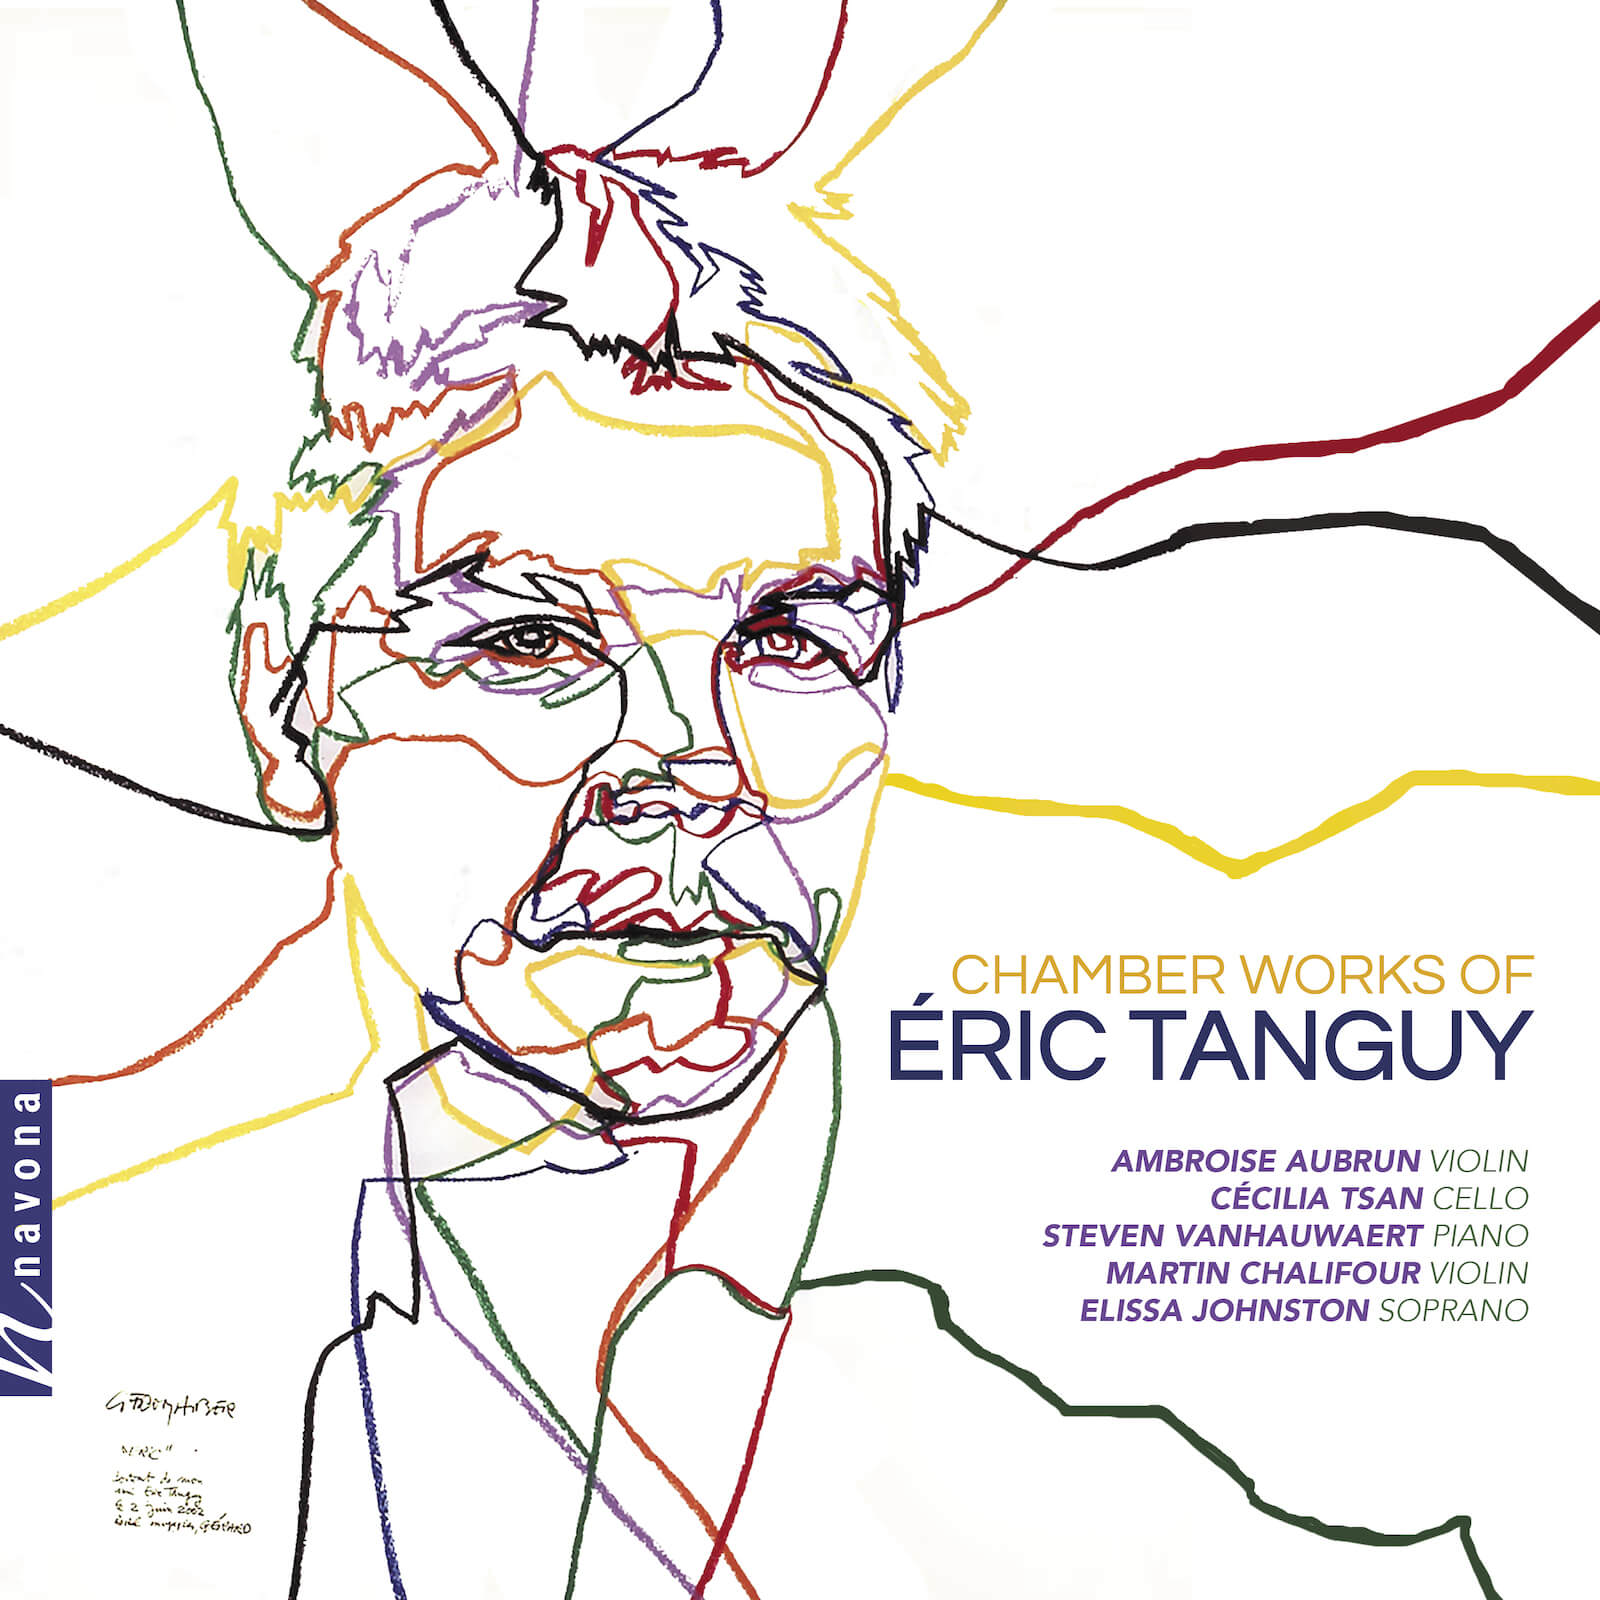 CHAMBER WORKS OF ERIC TANGUY